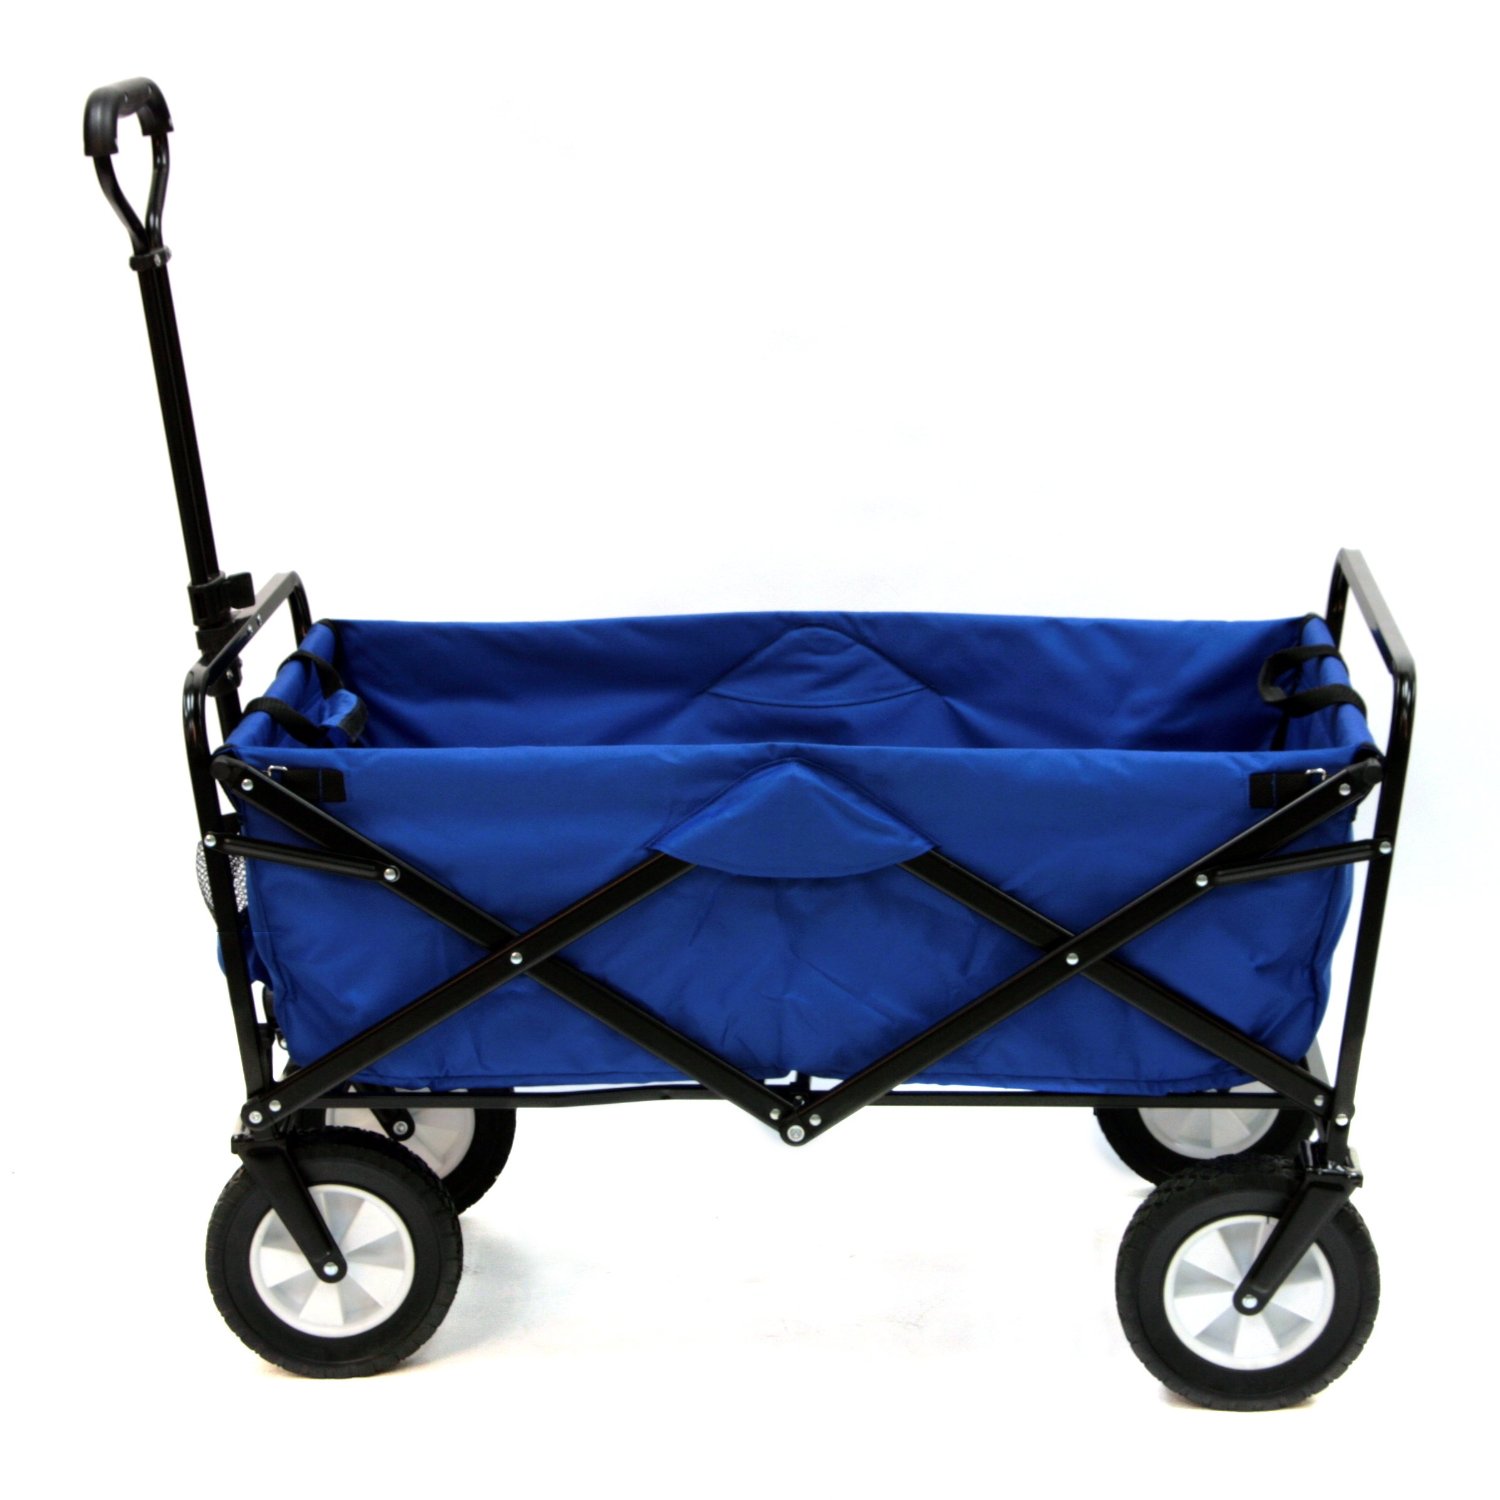 Mac Sports Collapsible Folding Outdoor Utility Wagon Just $67.38! (#1 Best Seller!)